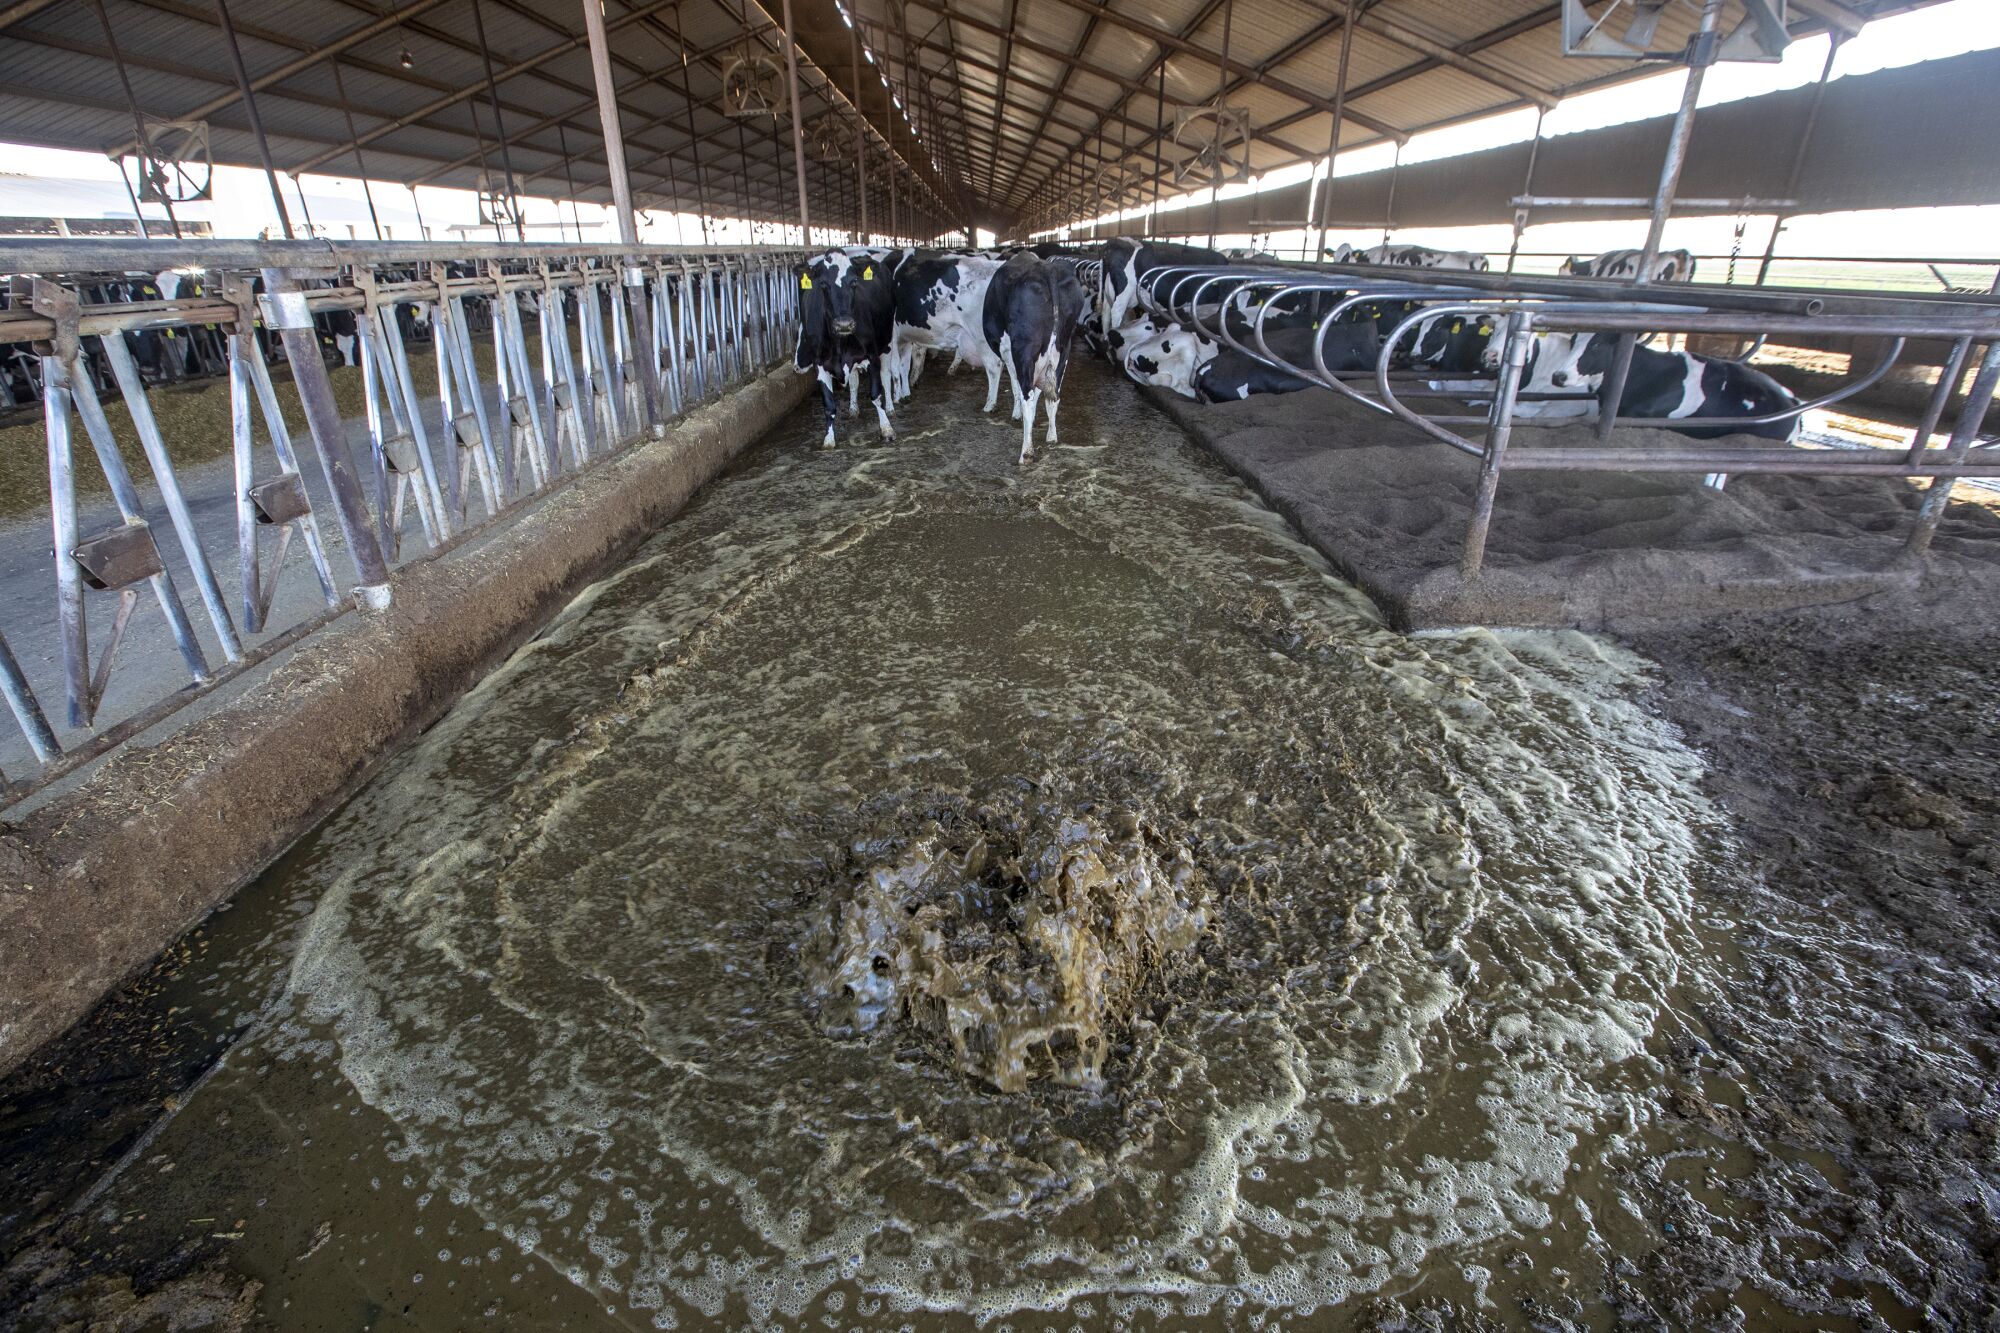 Cows stand in a barn as water gushes past their hooves, moving their waste toward a drain.